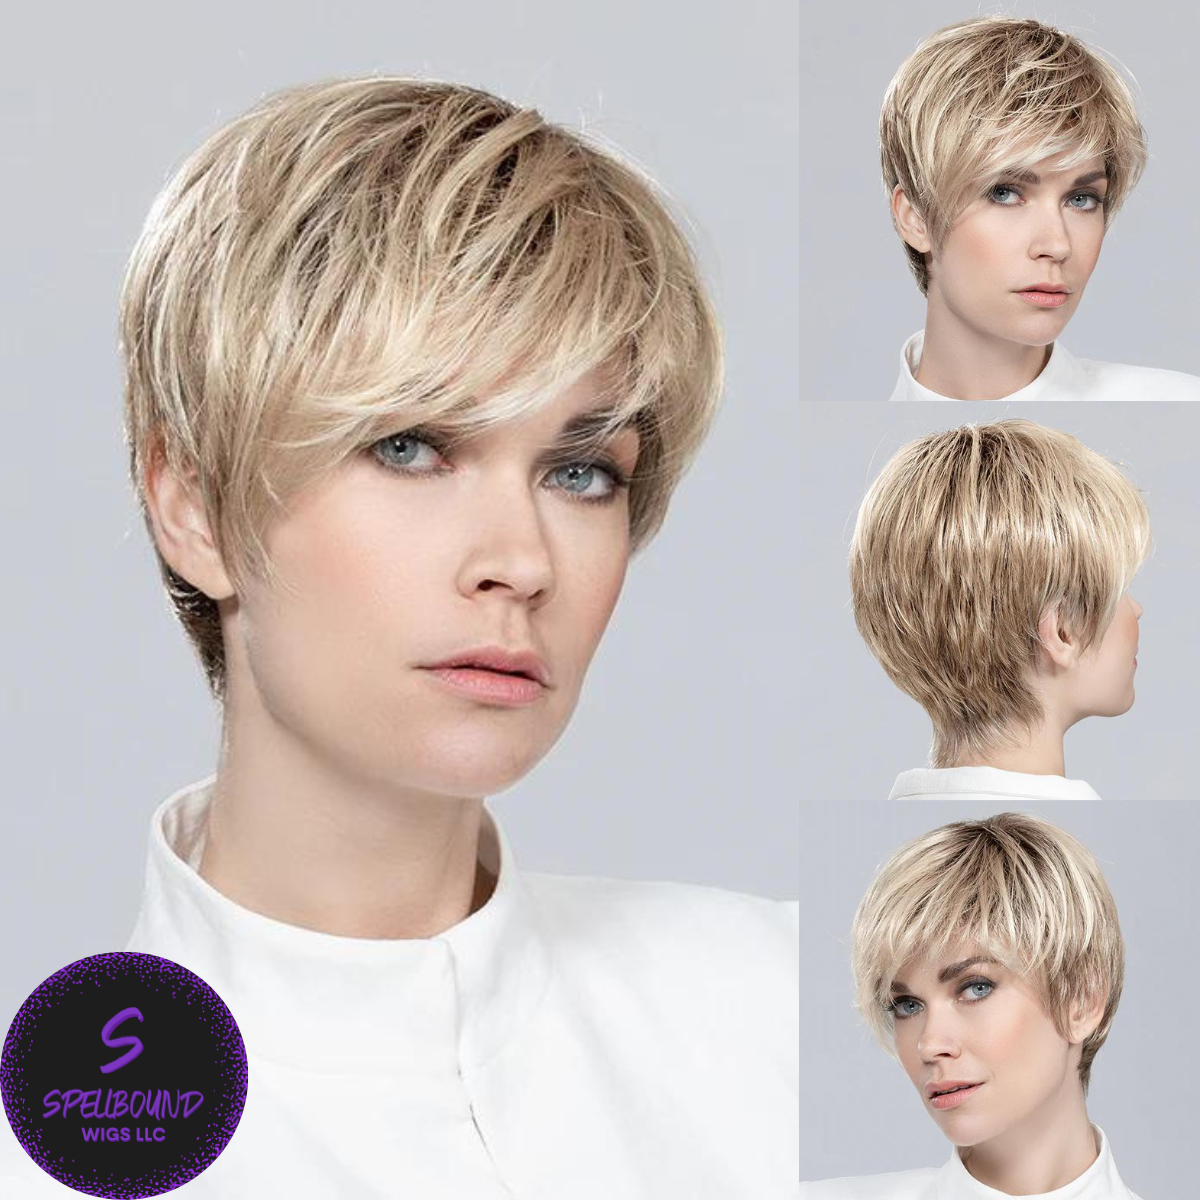 Fenja Small - Hair Power Collection by Ellen Wille